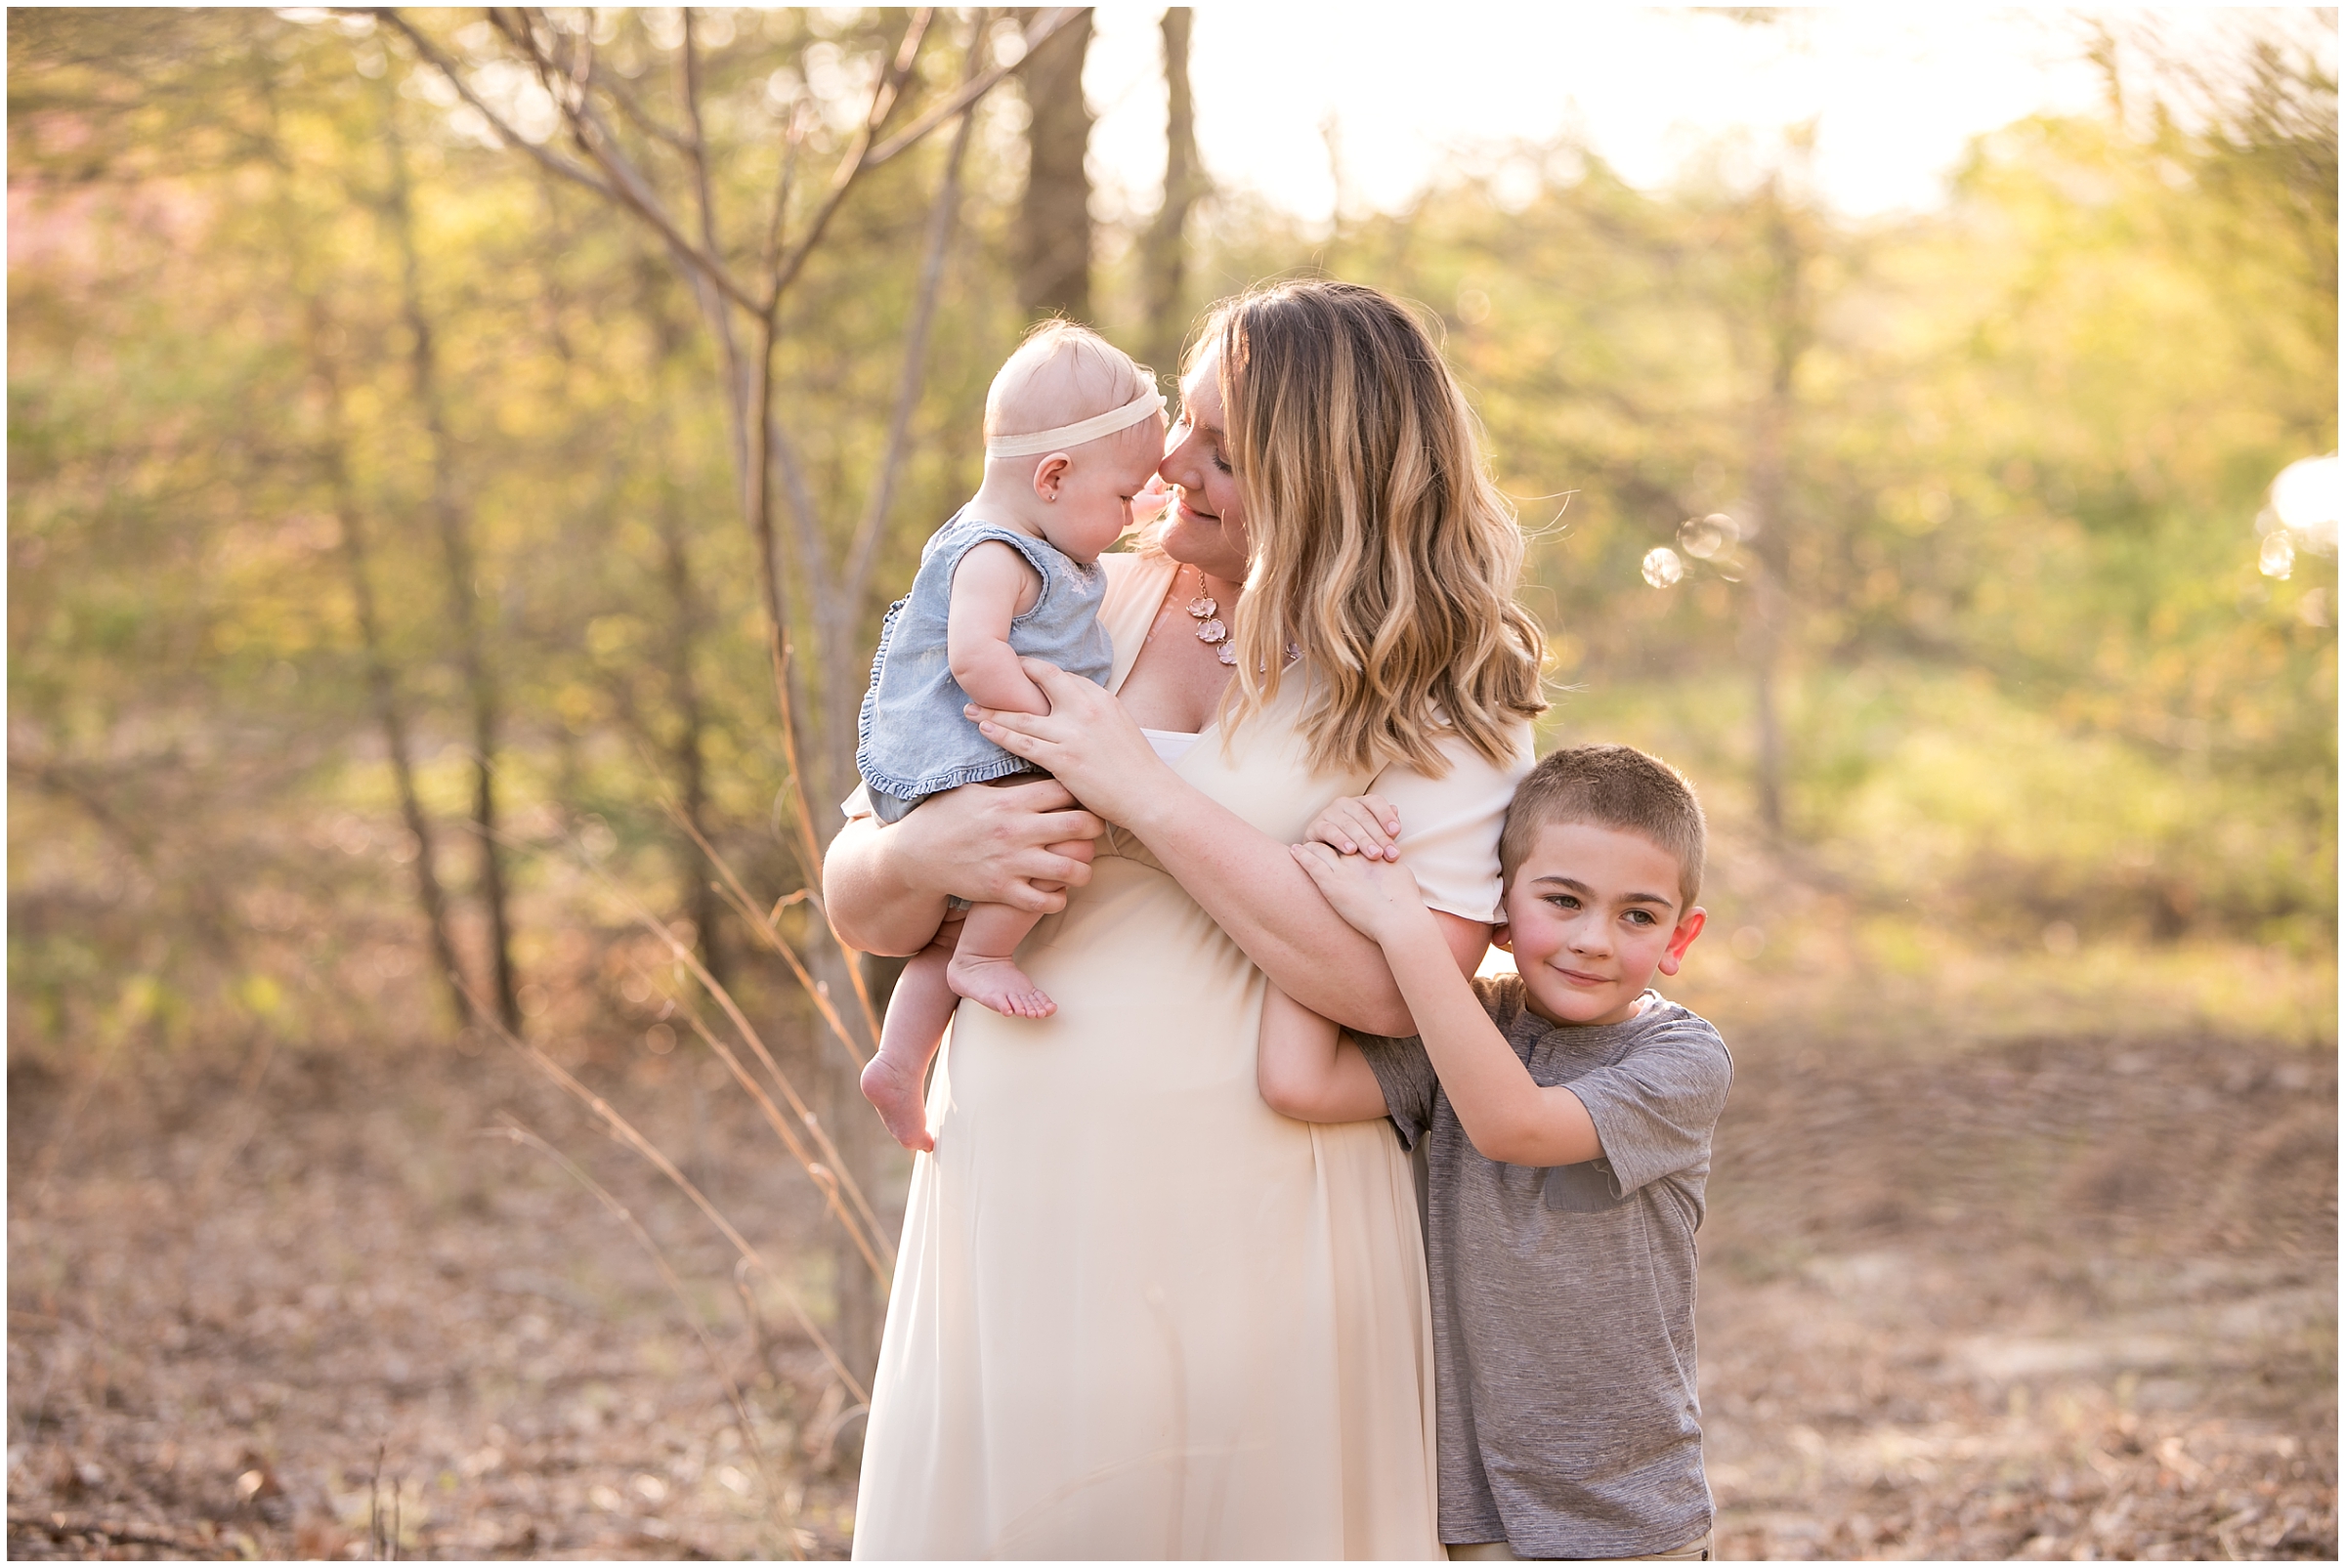 South Jersey Family Photographer - Boundary Creek Family Session